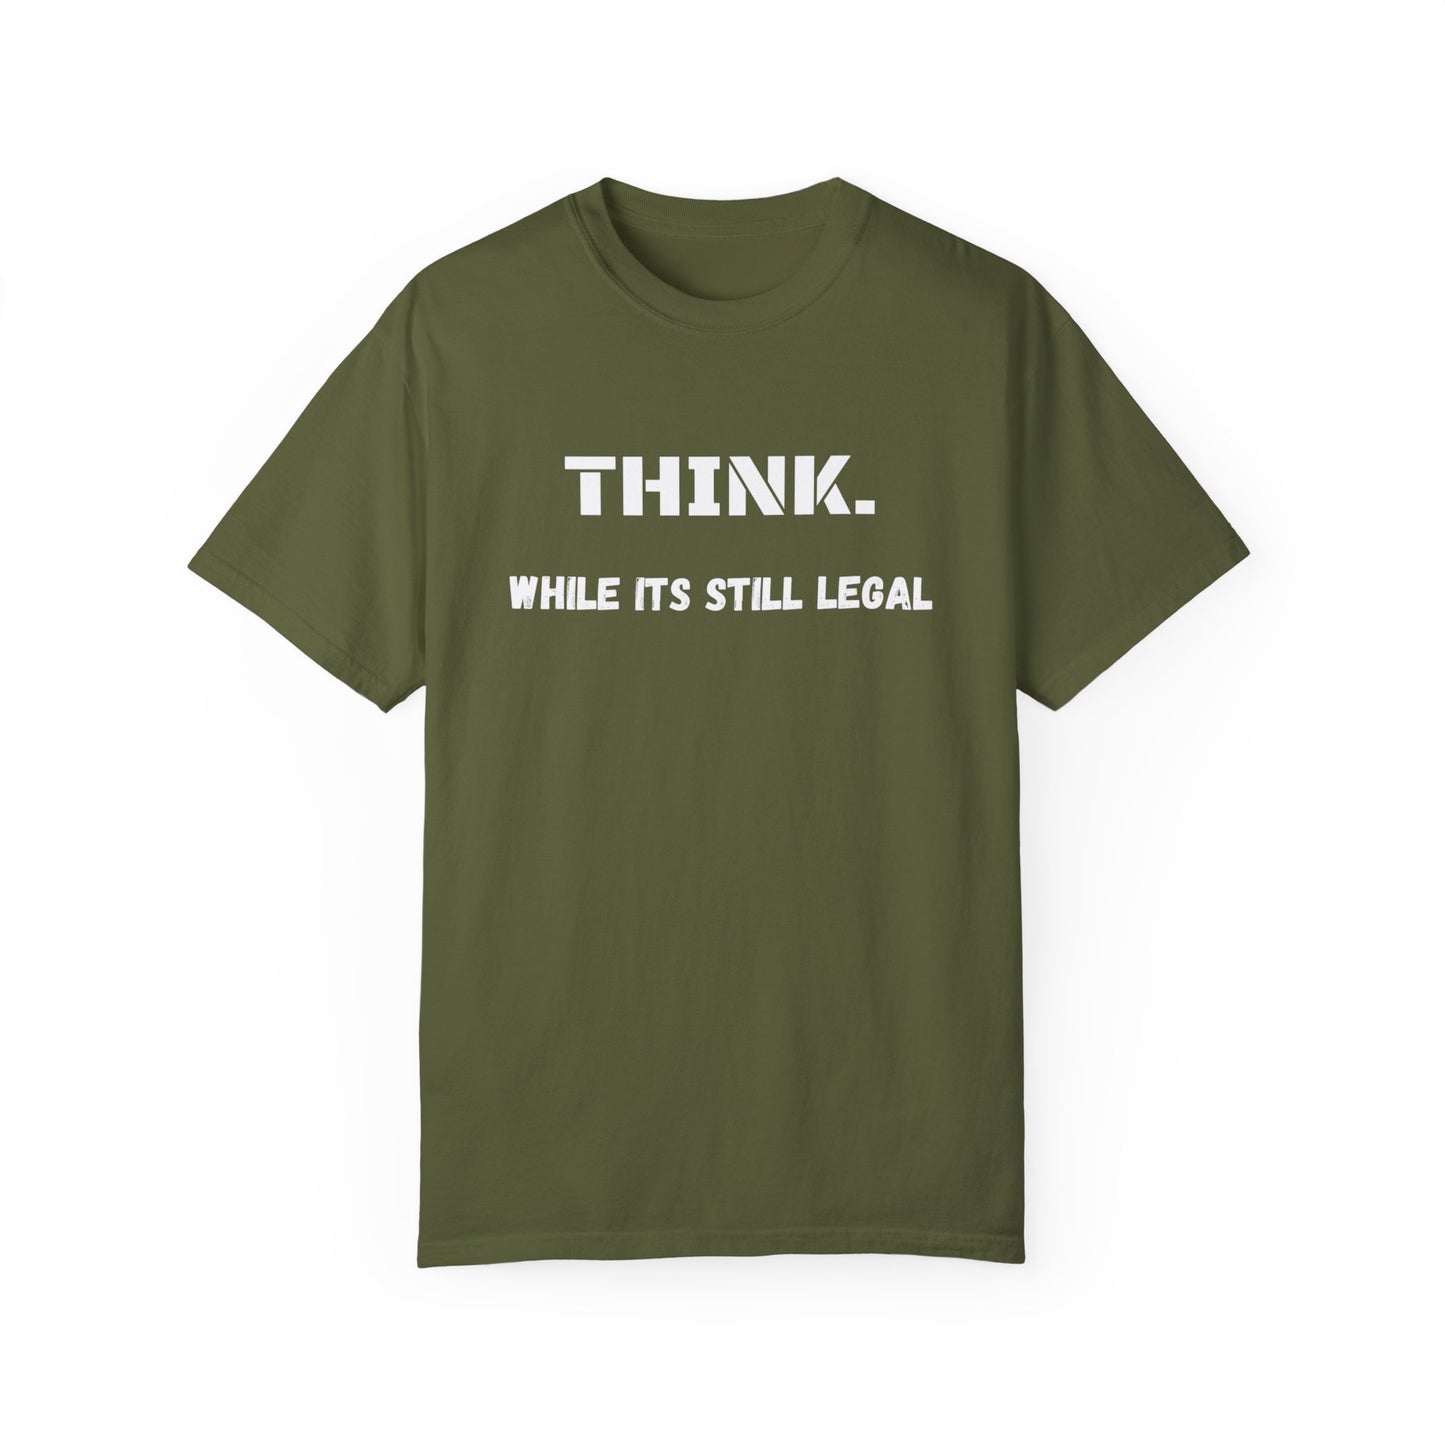 THINK. While Its Still Legal T-shirt